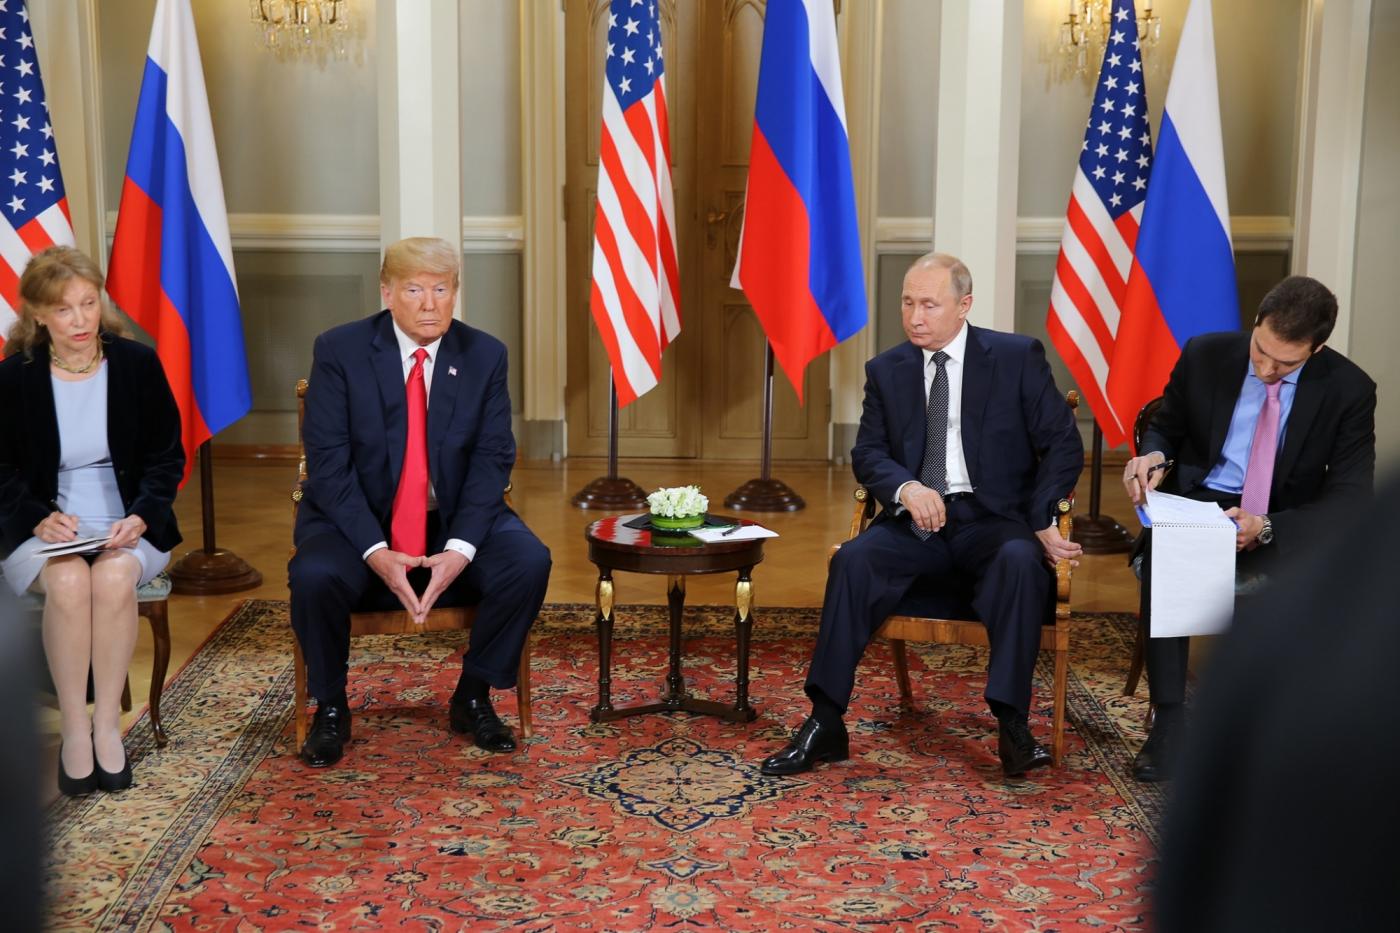 HELSINKI, July 16, 2018 (Xinhua) -- U.S. President Donald Trump (2nd L) and his Russian counterpart Vladimir Putin (2nd R) meet in Helsinki, Finland, on July 16, 2018. Donald Trump and Vladimir Putin started their first bilateral meeting here on Monday. (Xinhua/Office of the President of the Republic of Finland/Juhani Kandell/IANS) by .